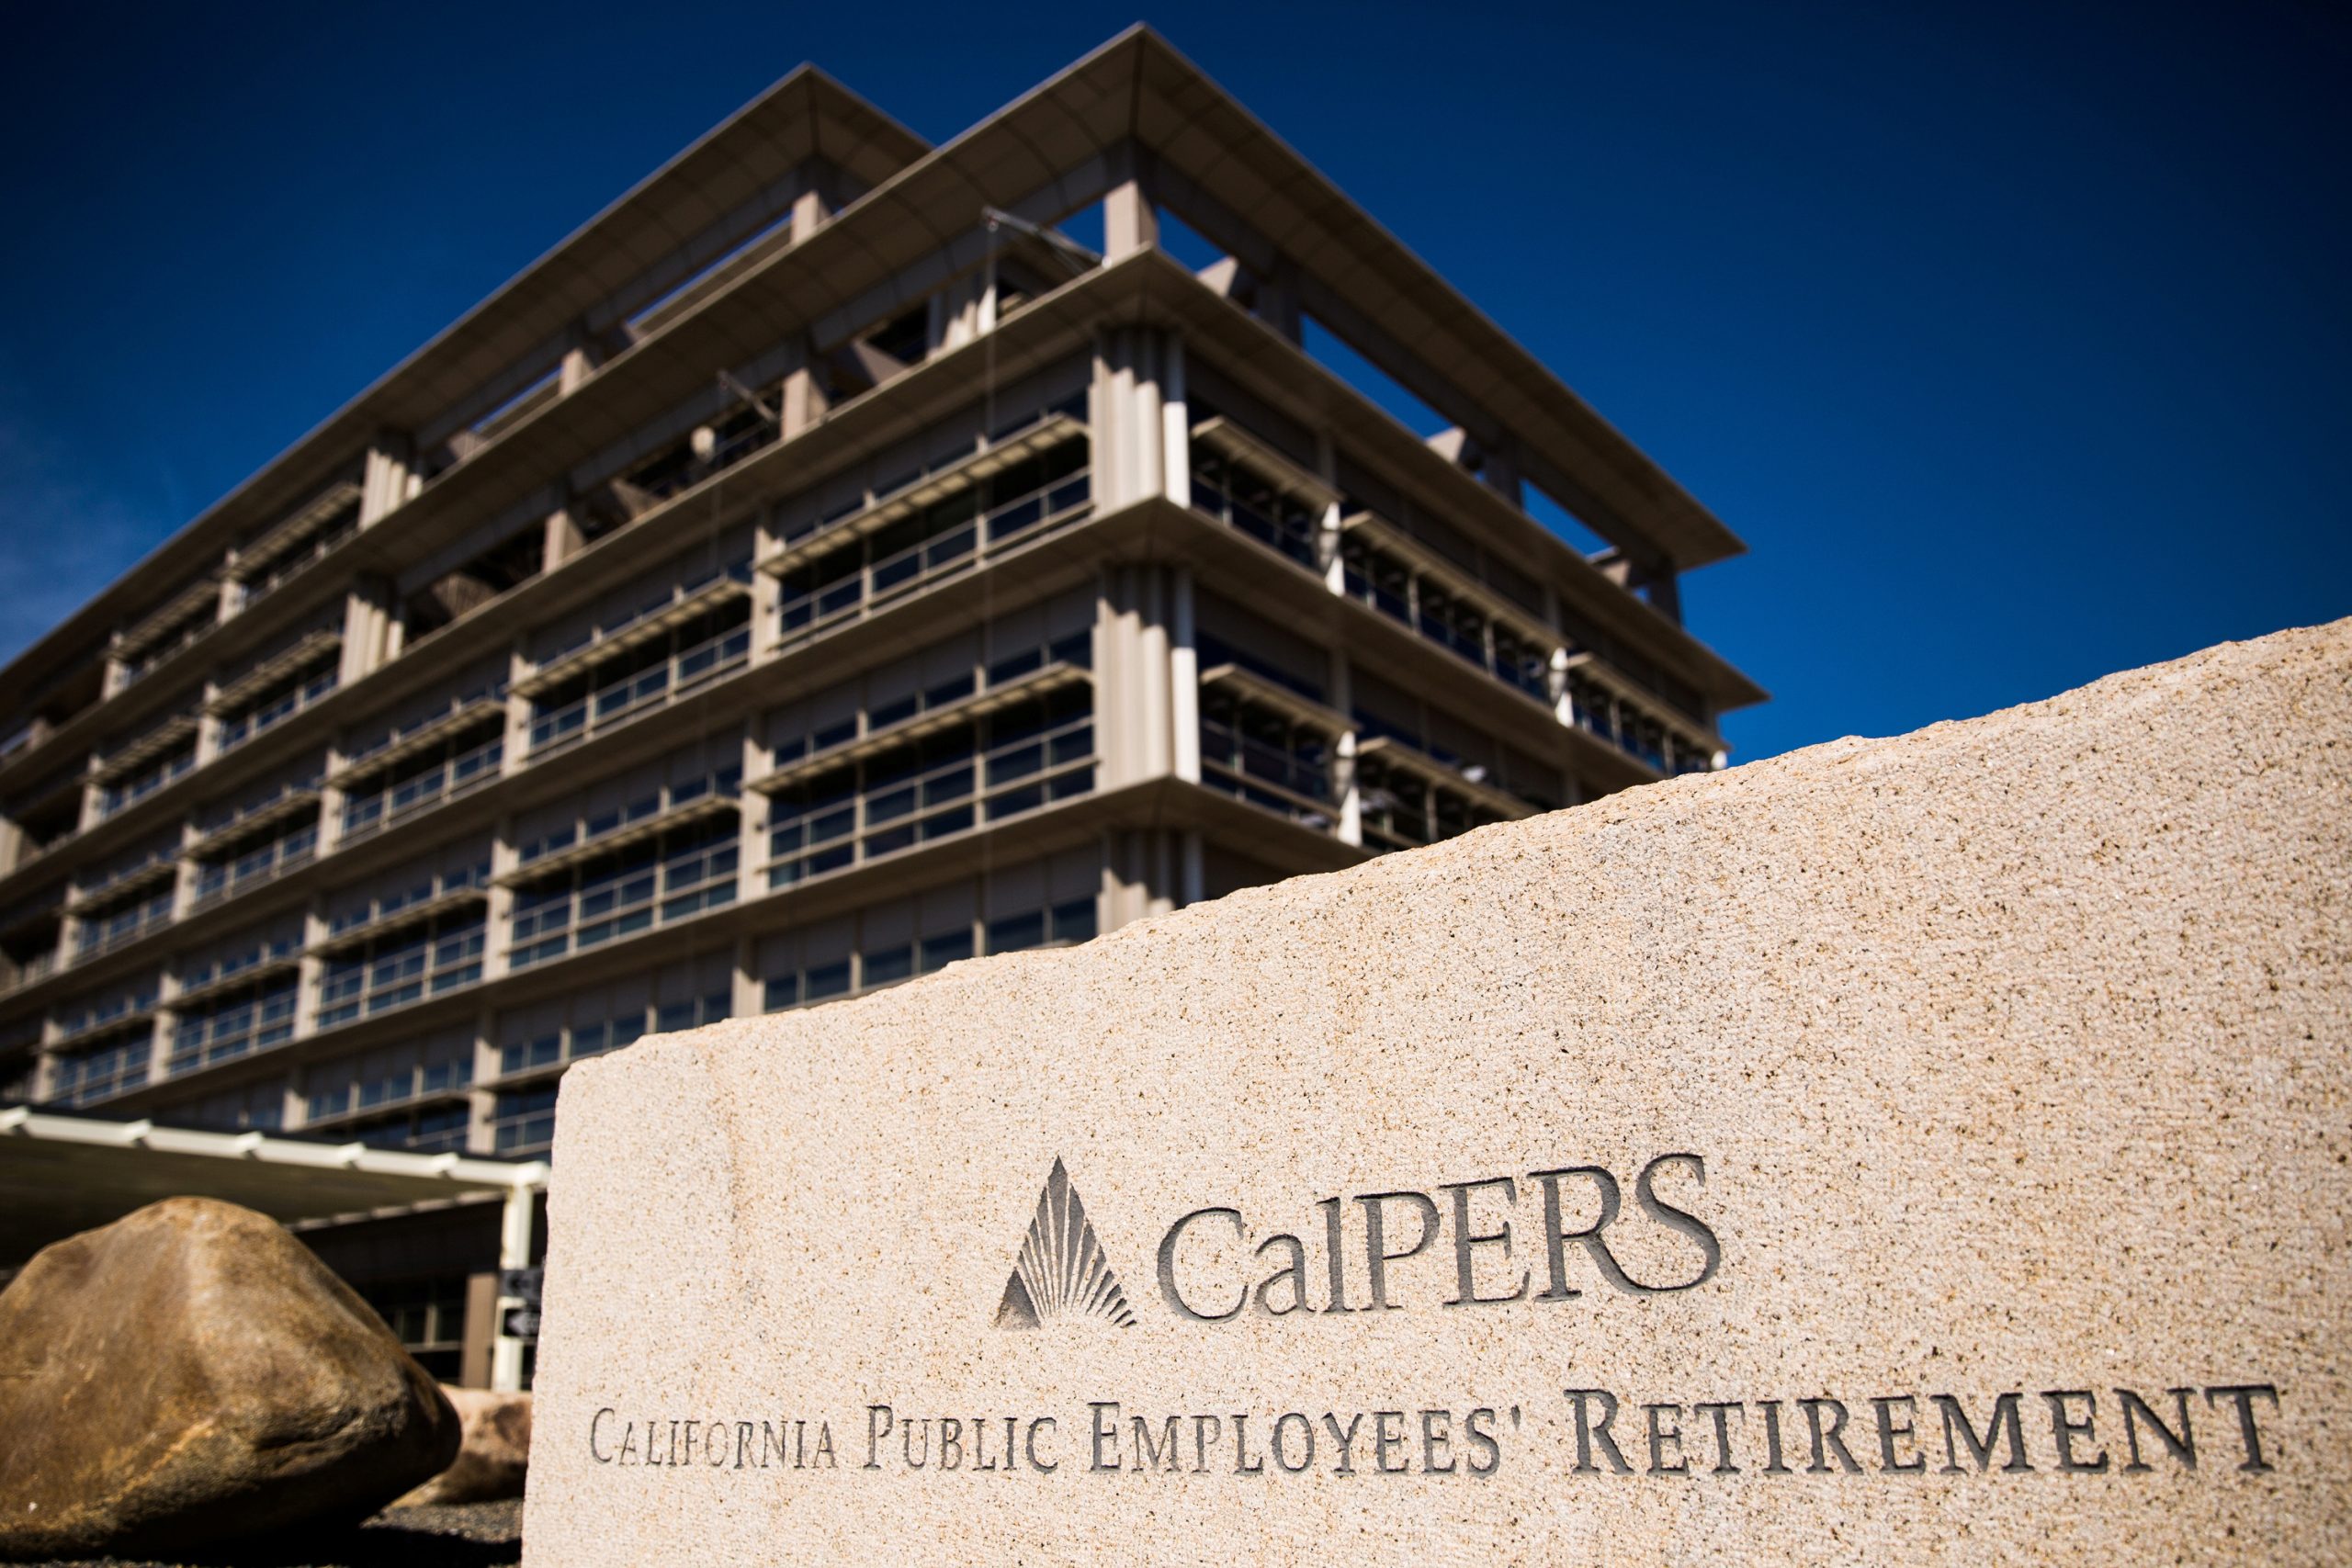  CalPERS to Double Climate-Focused Investments by 2030, Will Consider Asset Sales 